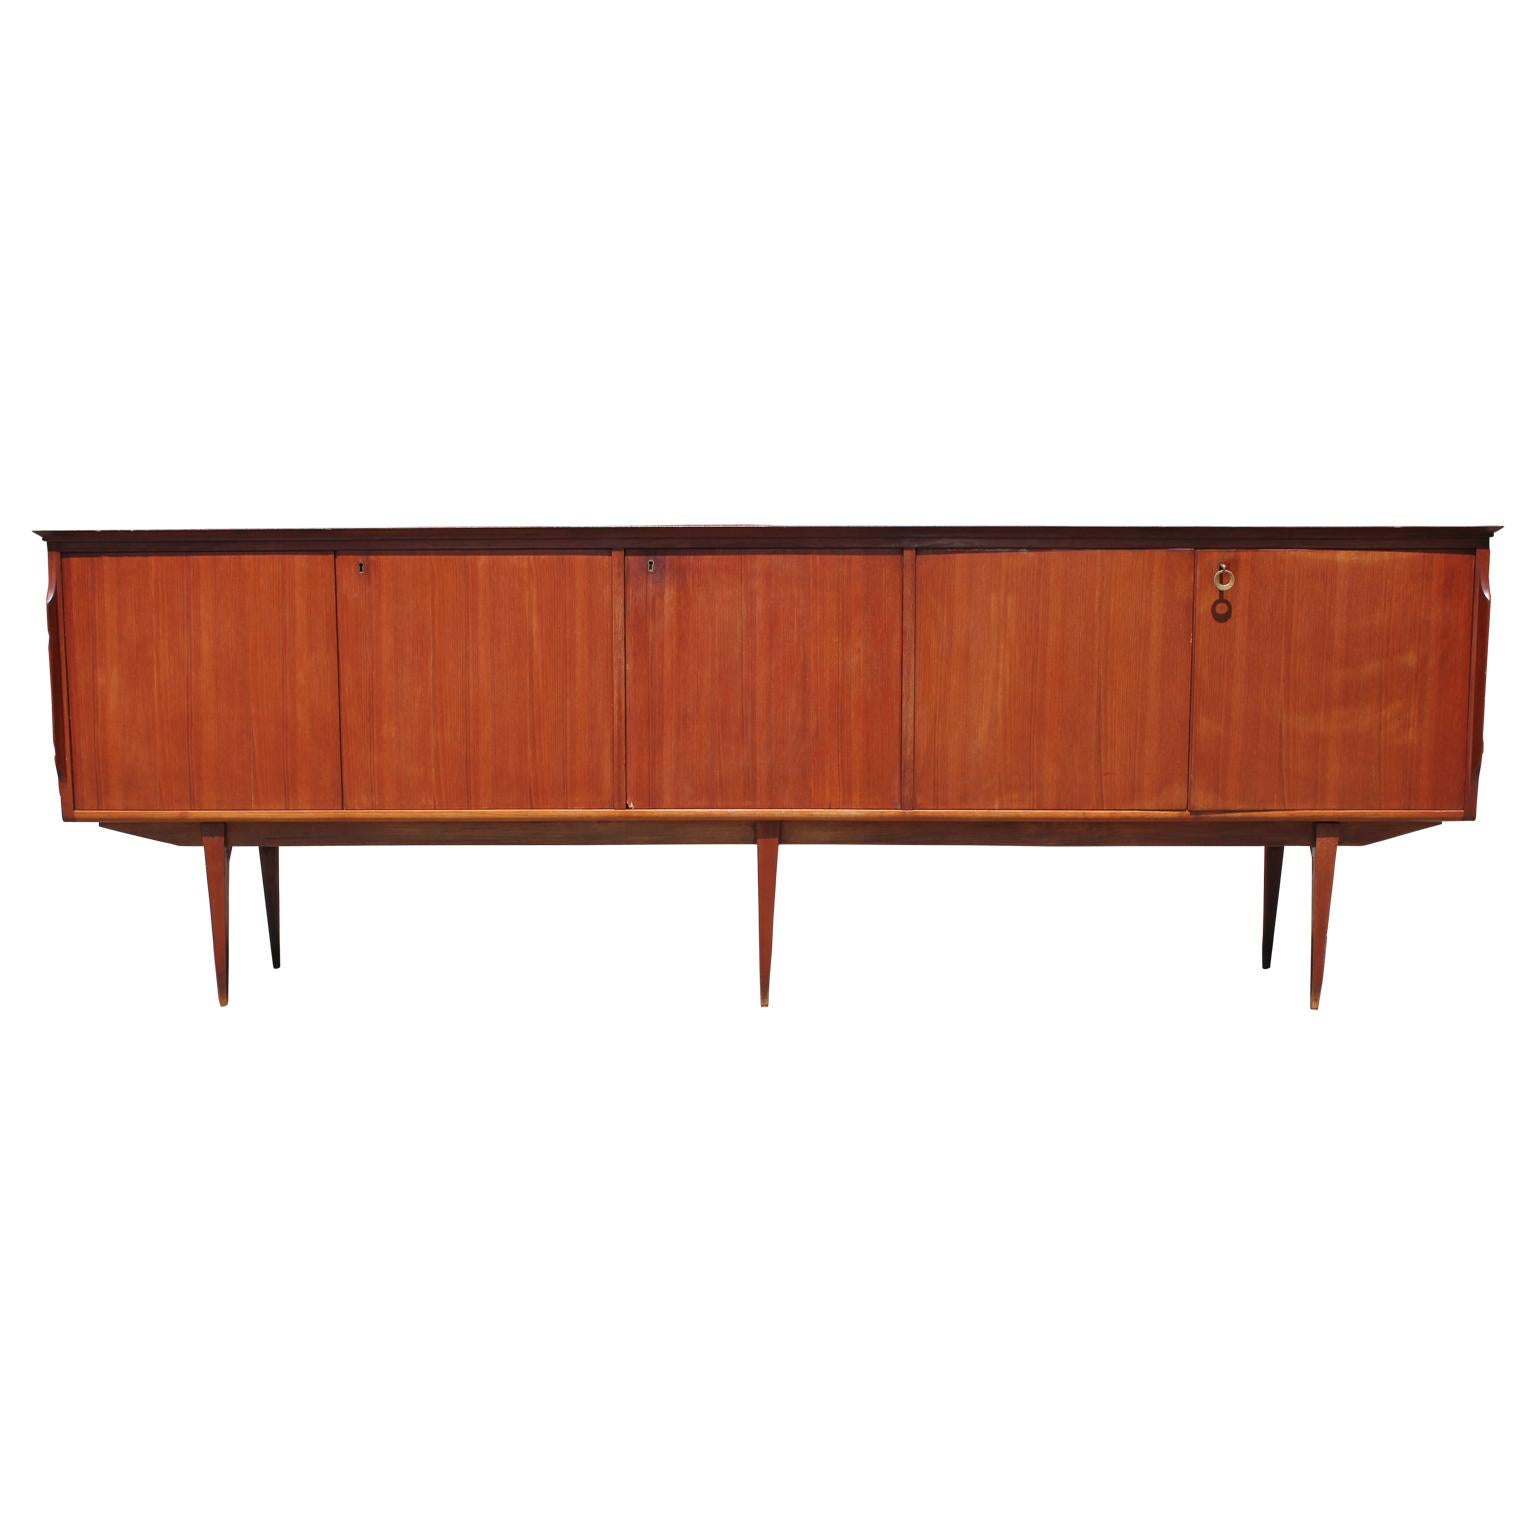 Stylish Mid-Century Modern credenza in the style of Ib Kofod Larsen. It features extra drawers inside the sideboard for added storage space.